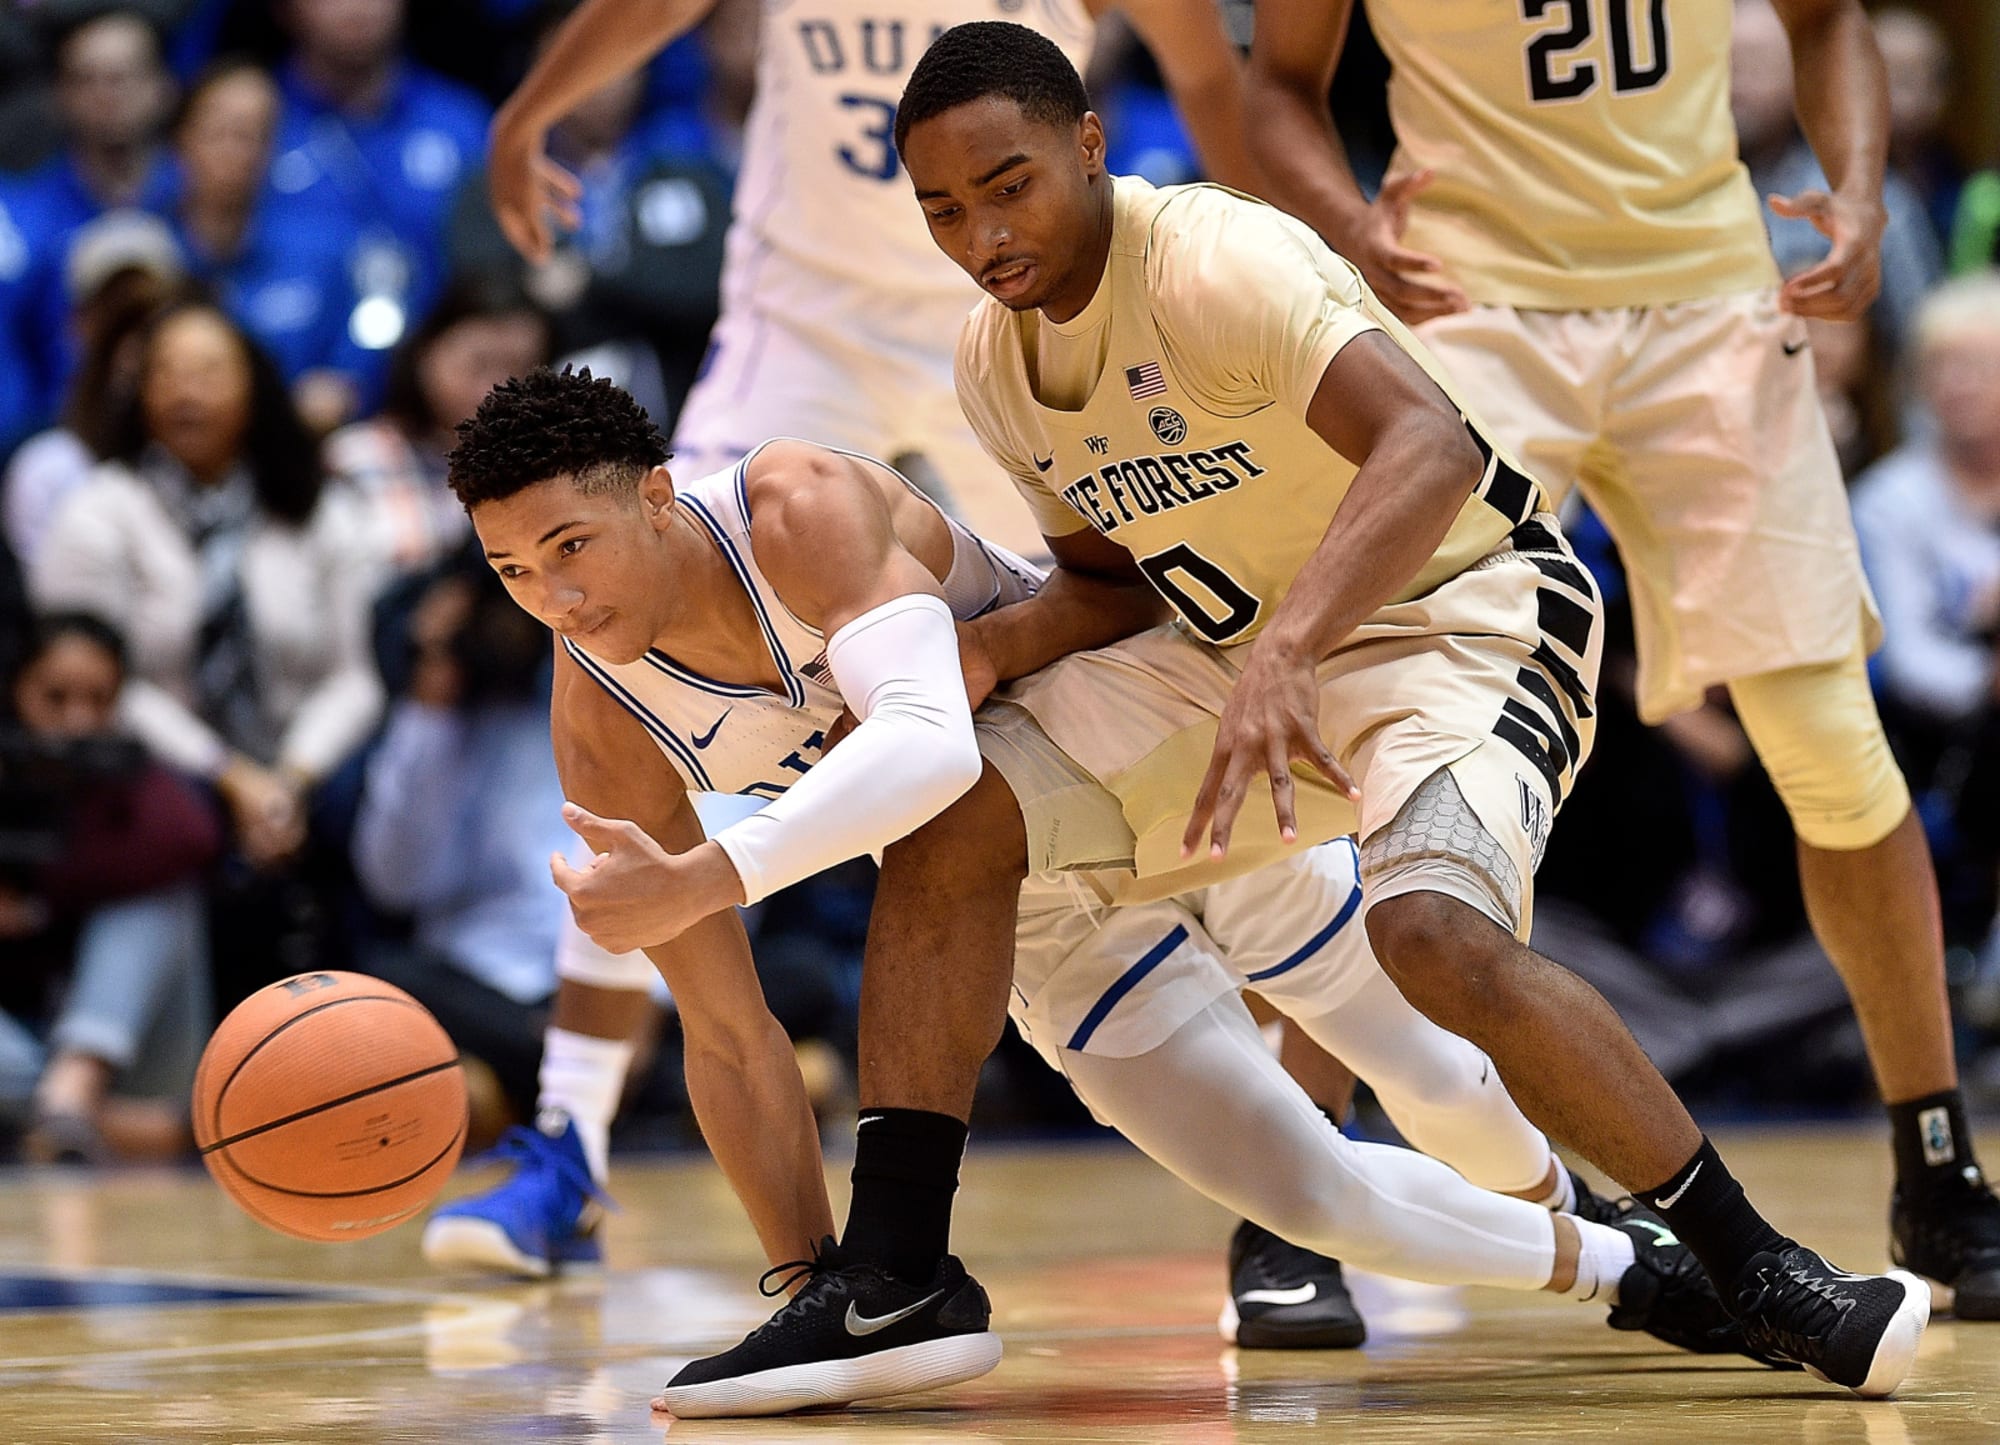 Wake Forest Basketball 201819 season preview for the Demon Deacons